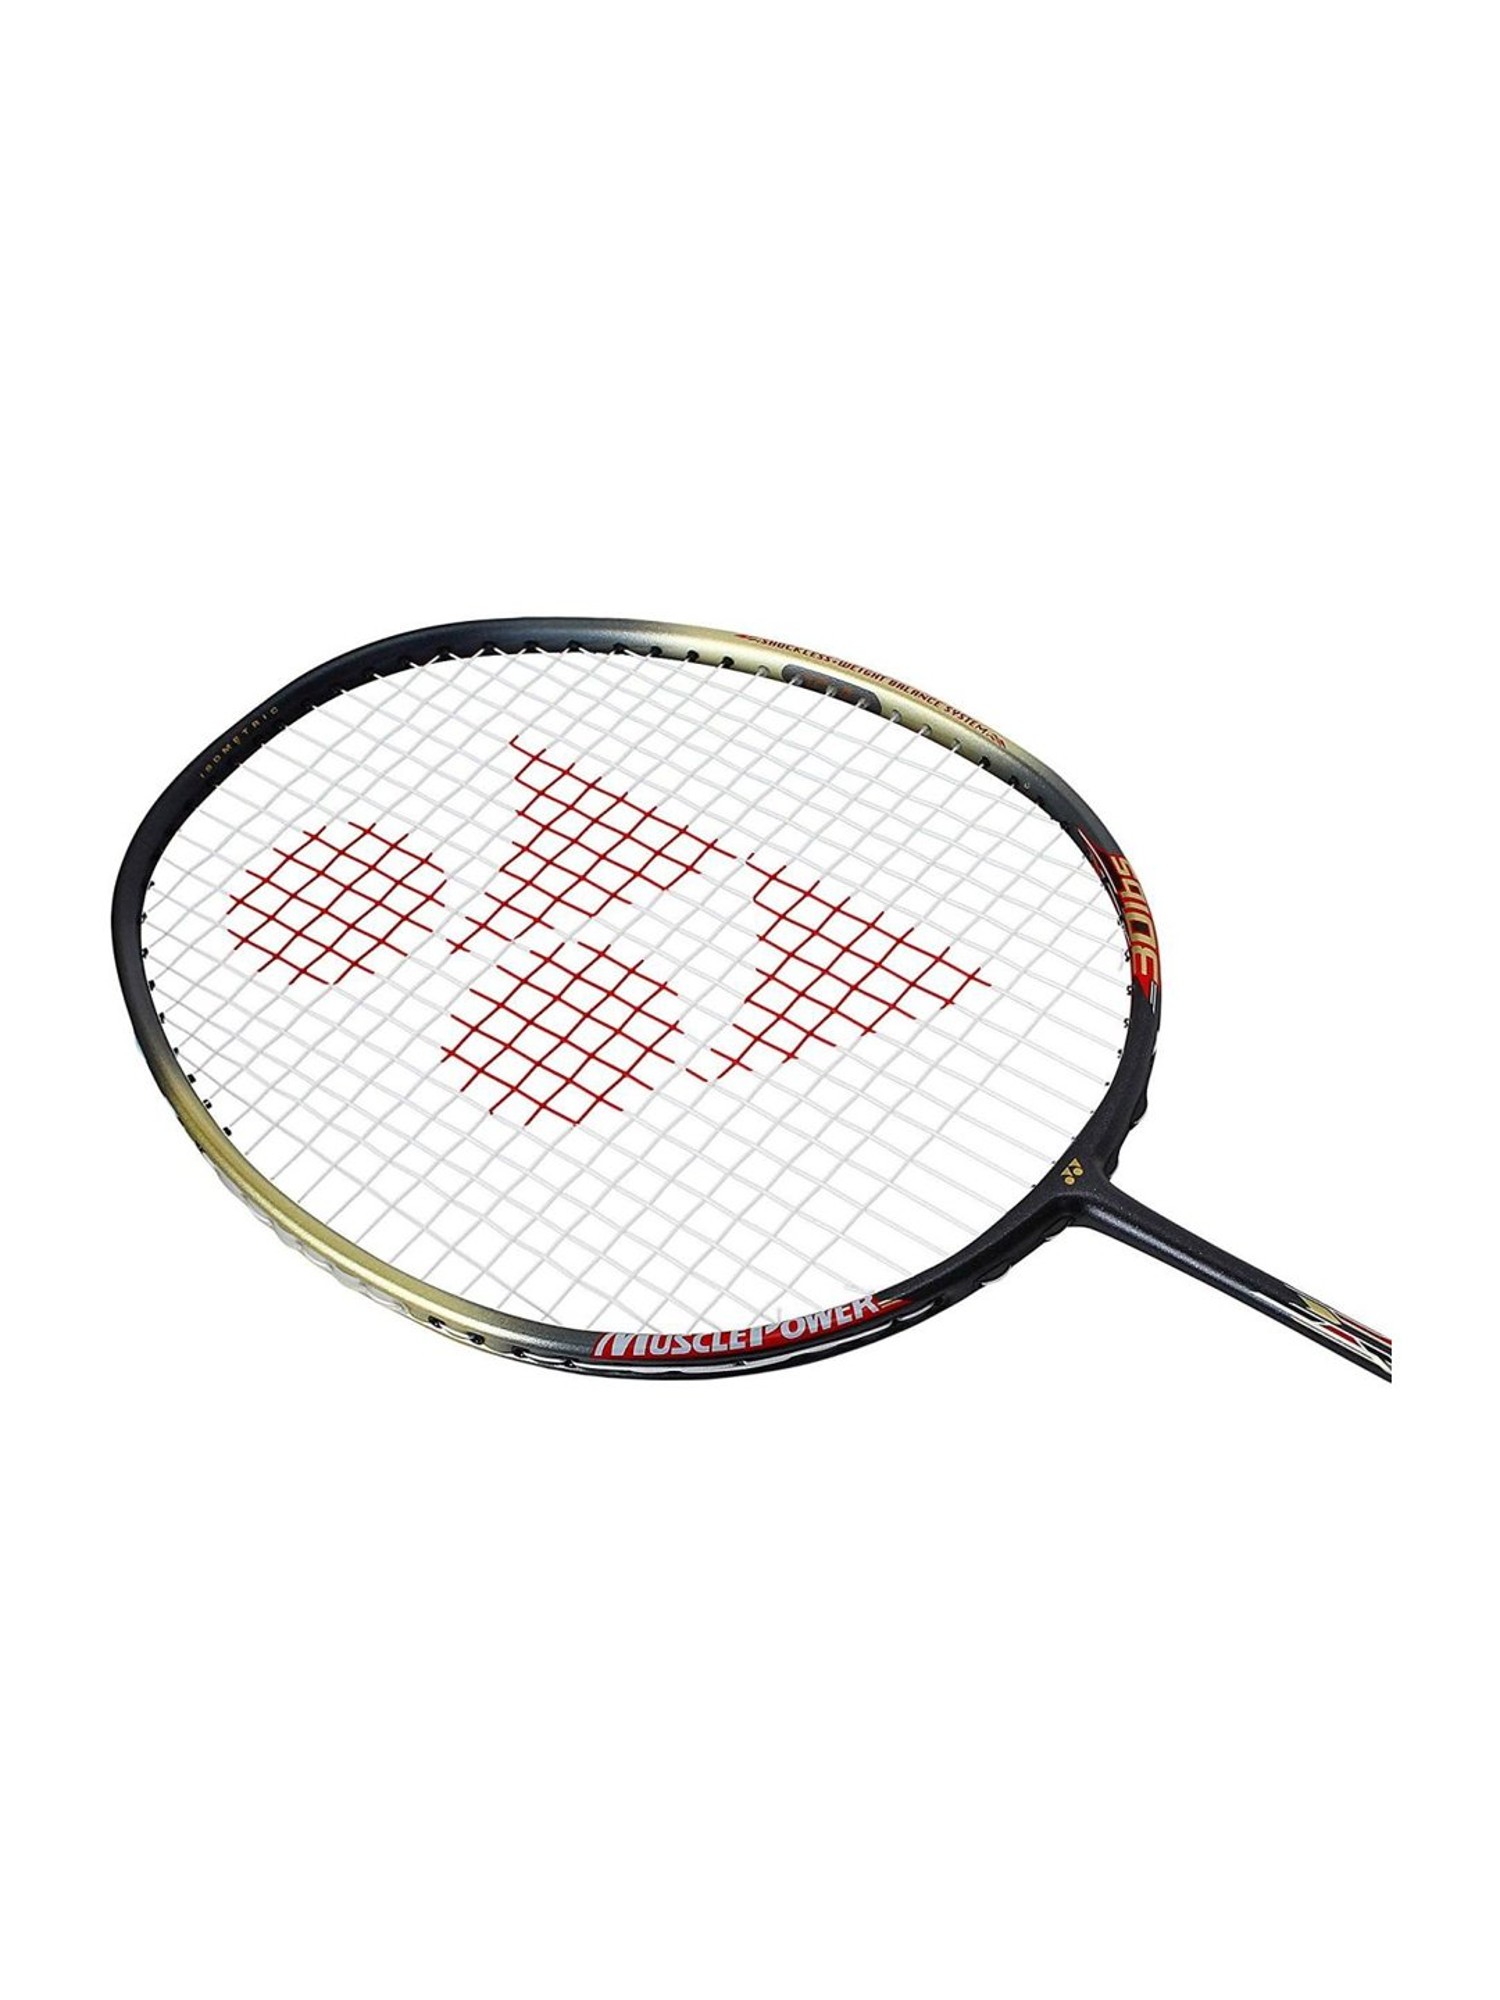 Yonex Muscle Power 55 Black Badminton Racquet with Cover with Full Cover and Grip